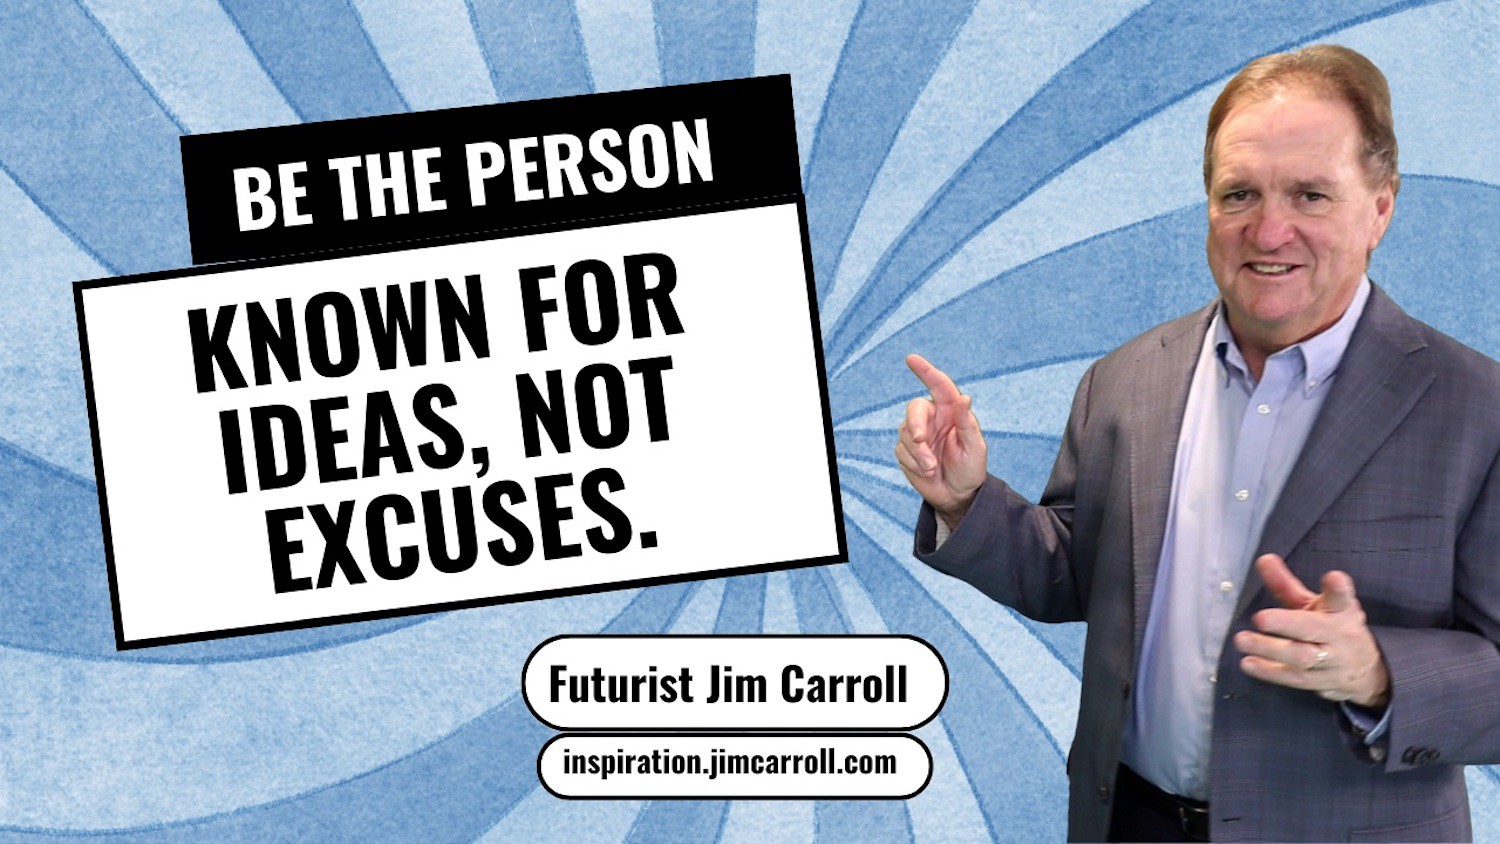 "Be the person known for ideas, not excuses"  -  Futurist Jim Carroll